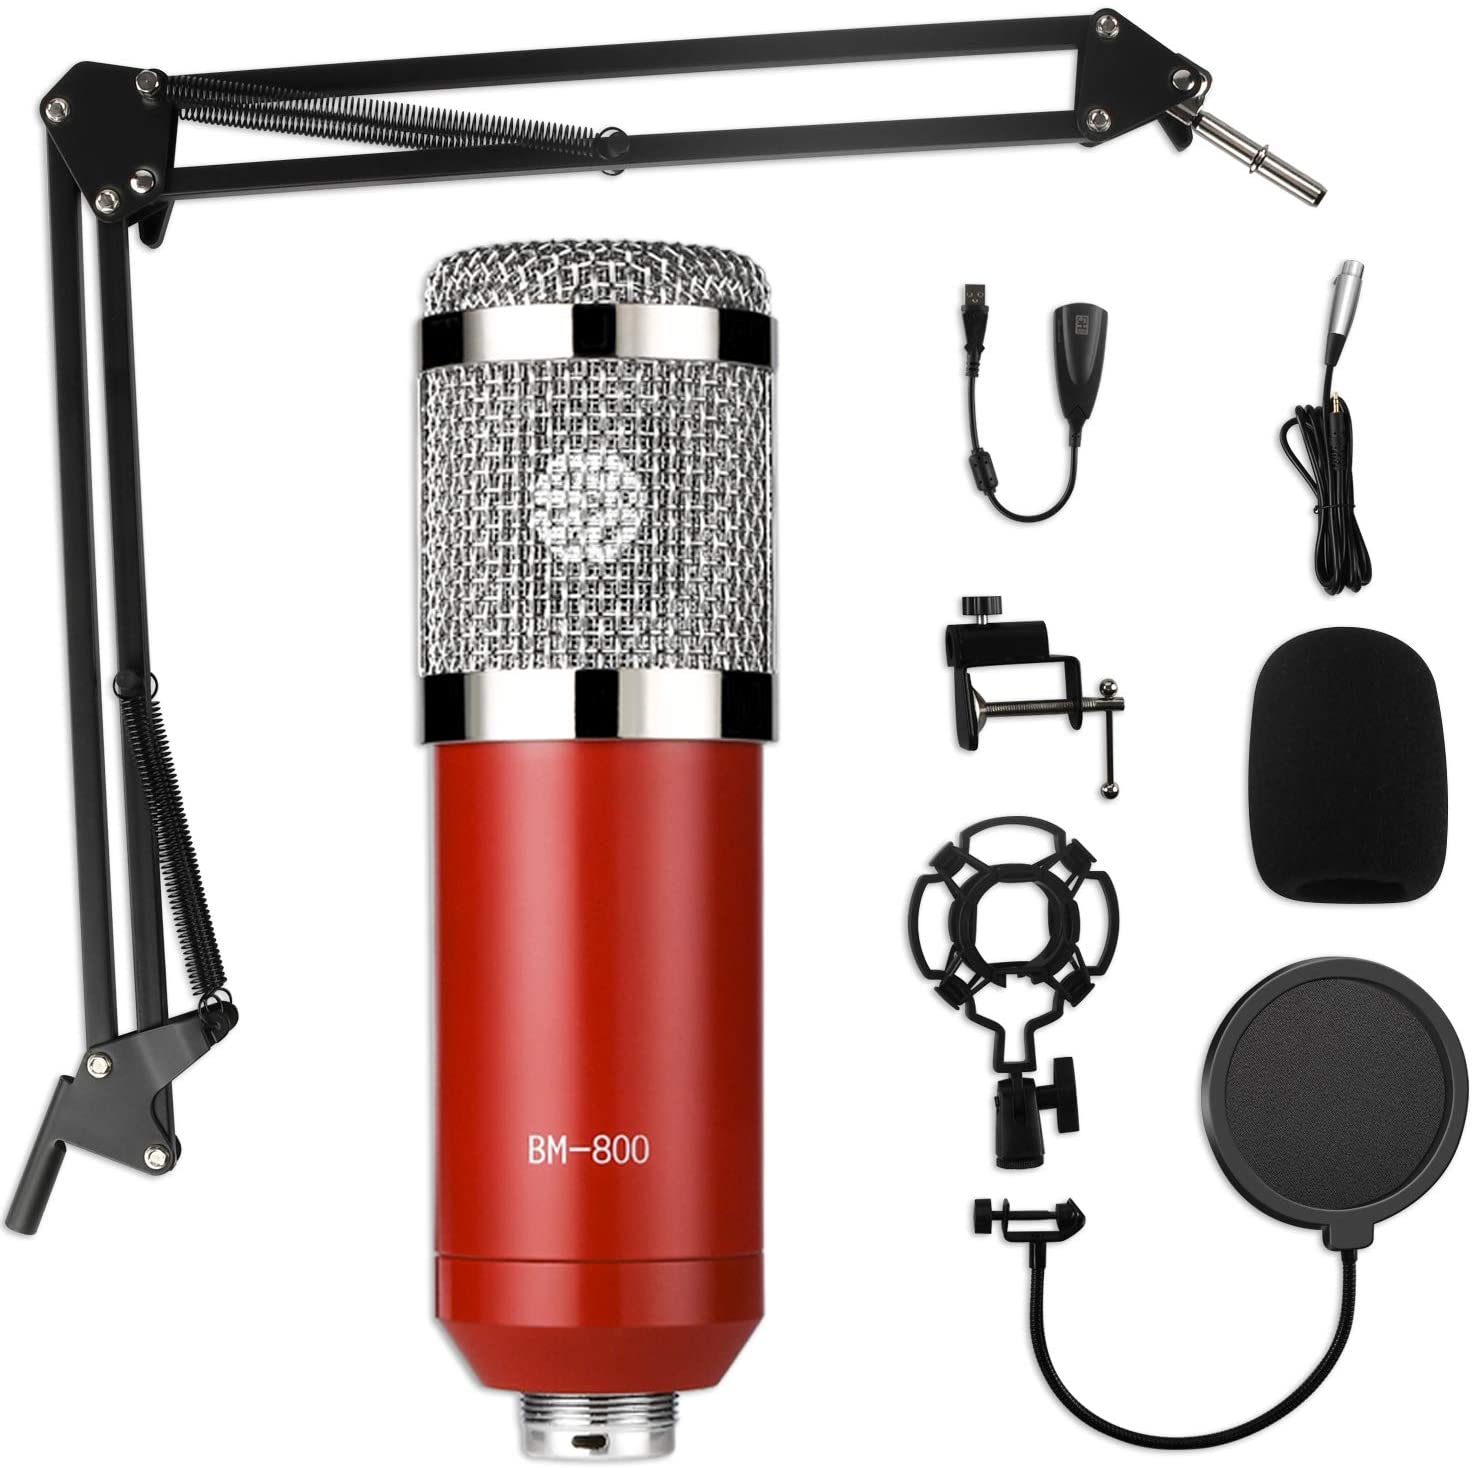 Rybozen Condenser Microphone Bundle Kit,Computer PC Cardioid Studio Mic Set with Mic Suspension Scissor Arm, Stand Shock Mount & Pop Filter for Instruments Voice Overs Recording & Broadcasting (Red)